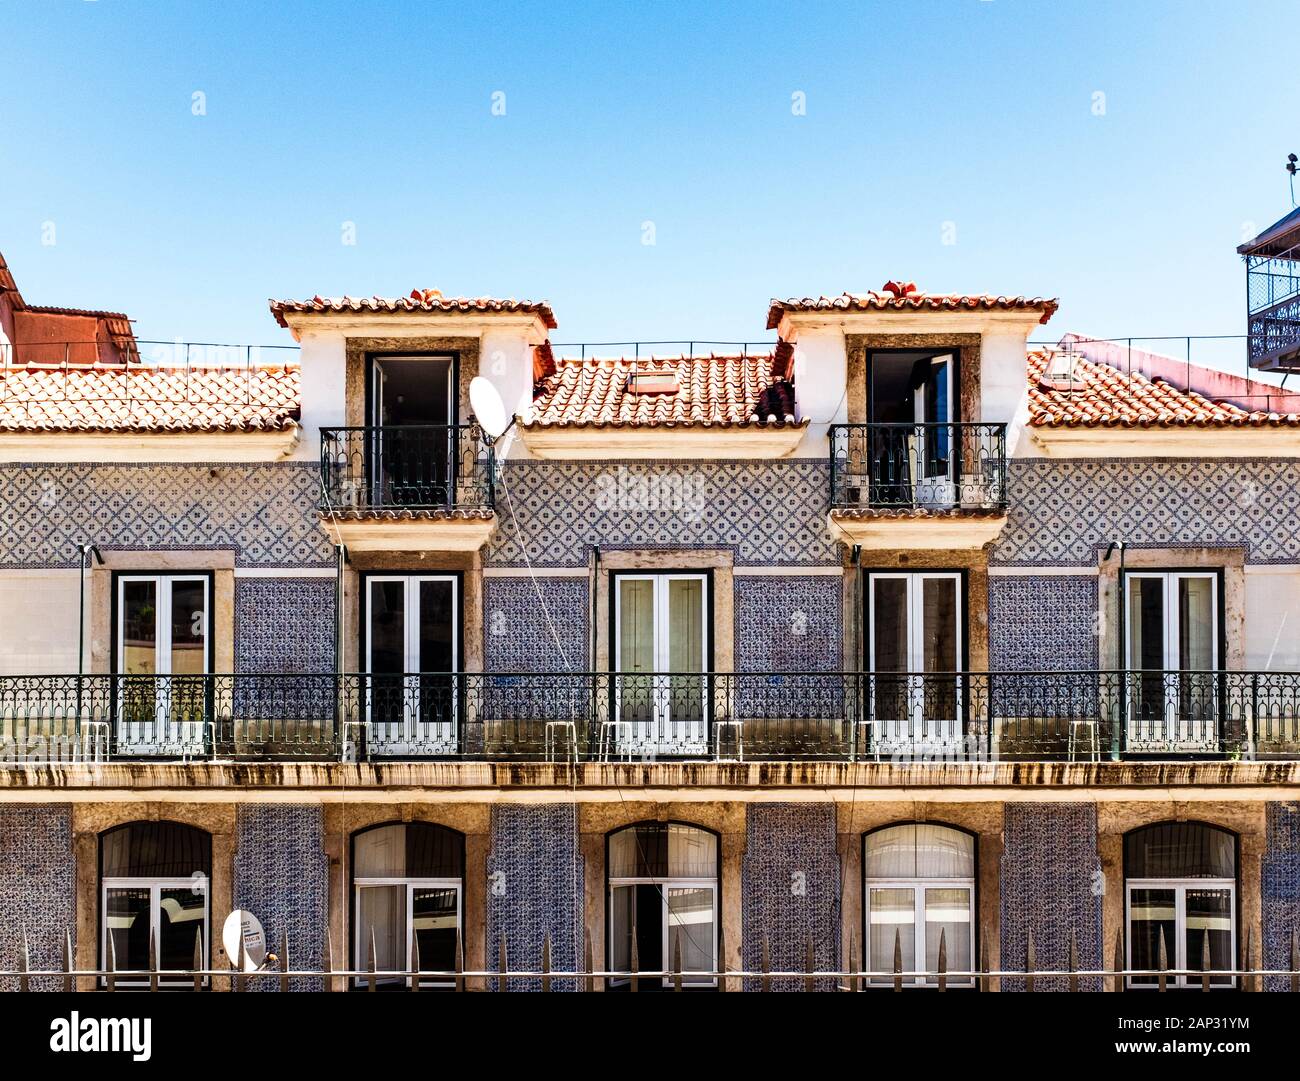 Traditional Lisbon dwelling house with tile decoration and balconies. Stock Photo